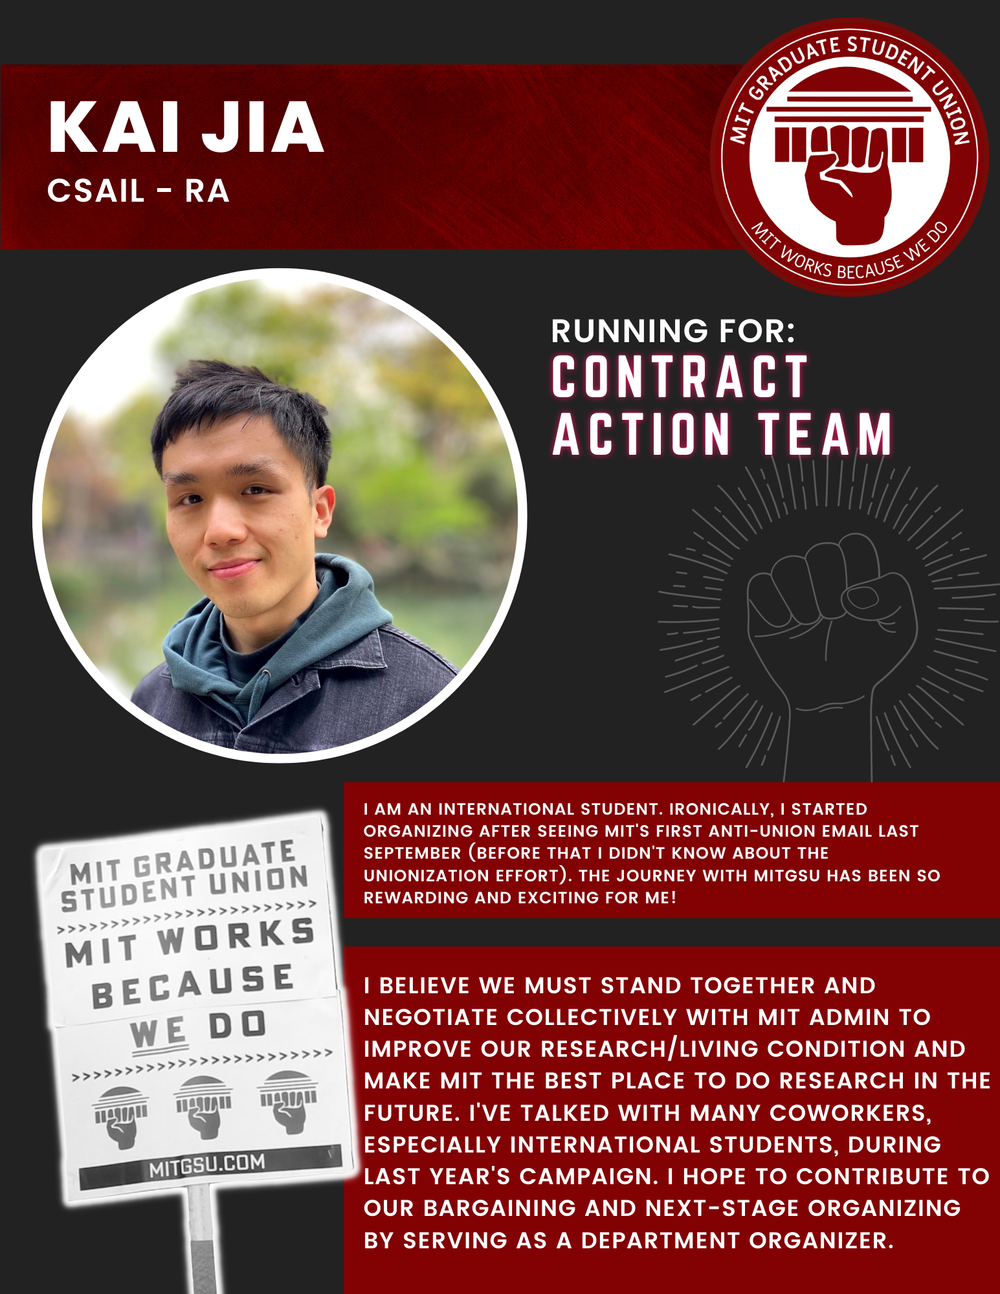  KAI JIA CSAIL - RA   RUNNING FOR: Contract Action Team  I AM AN INTERNATIONAL STUDENT. IRONICALLY, I STARTED ORGANIZING AFTER SEEING MIT'S FIRST ANTI-UNION EMAIL LAST SEPTEMBER (BEFORE THAT I DIDN'T KNOW ABOUT THE UNIONIZATION EFFORT). THE JOURNEY W